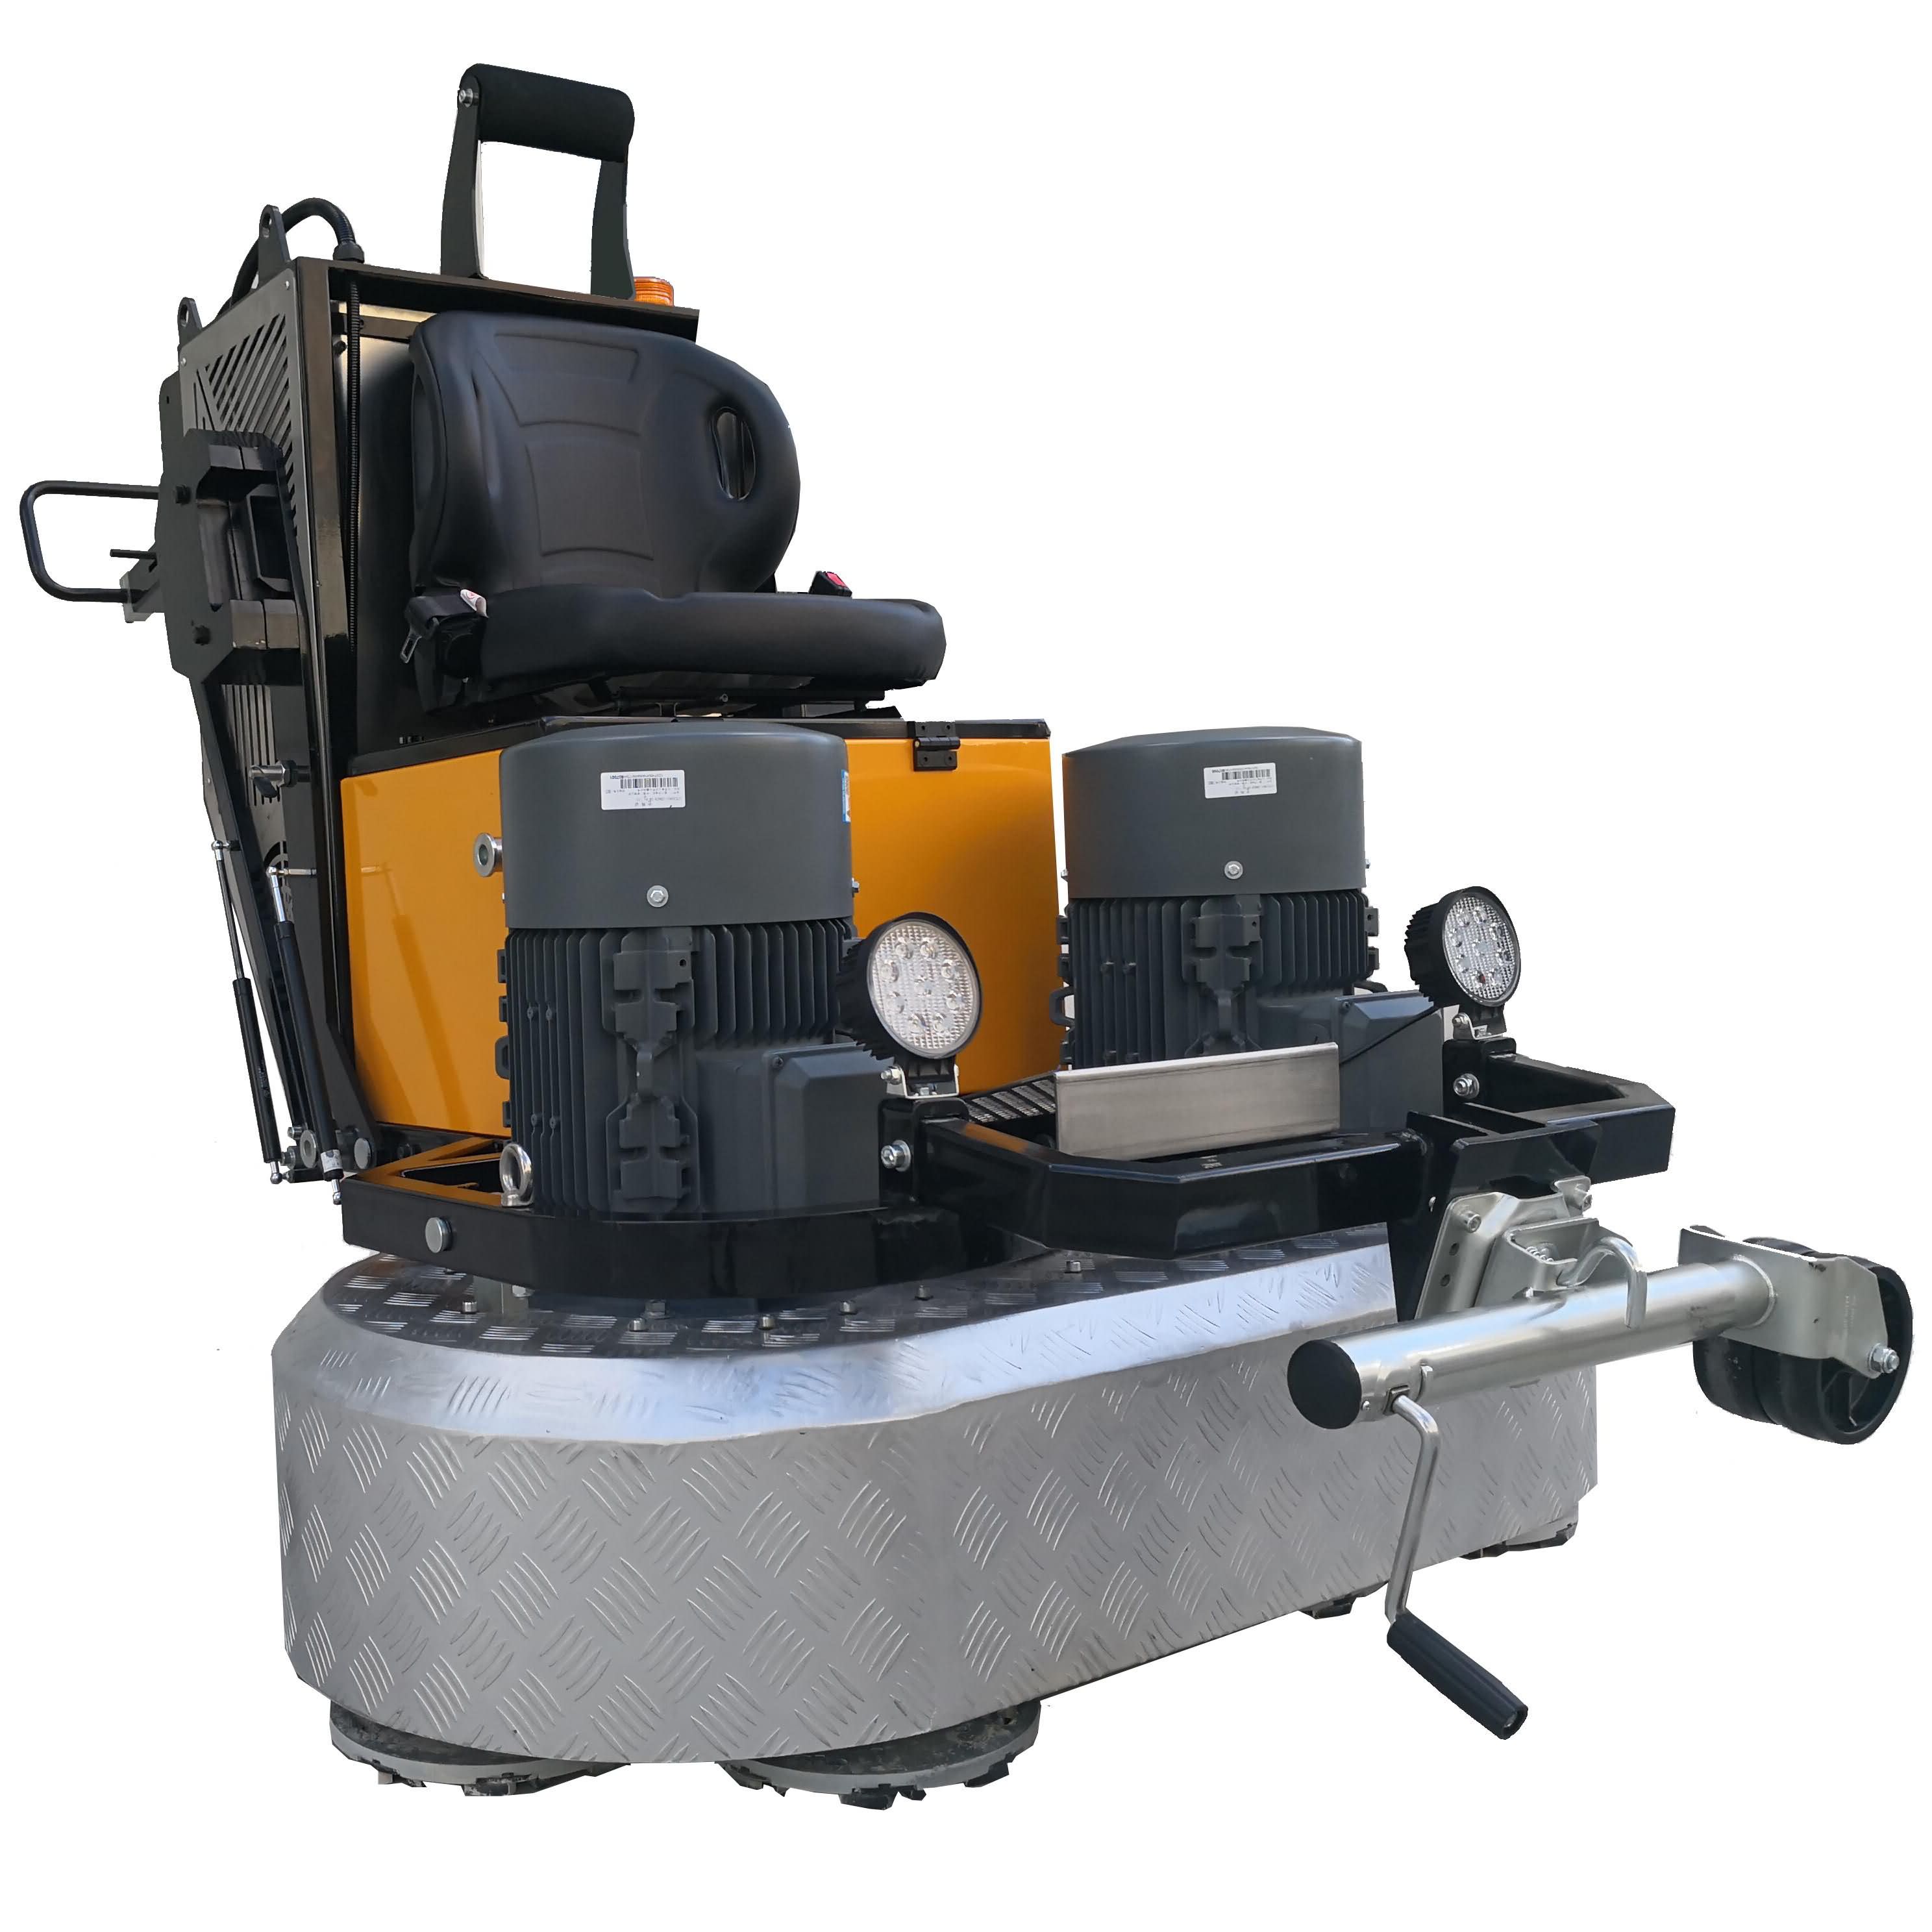 D1400 Model 0-1800rpm Double Planetary Ride on Concrete Floor Grinding Machine